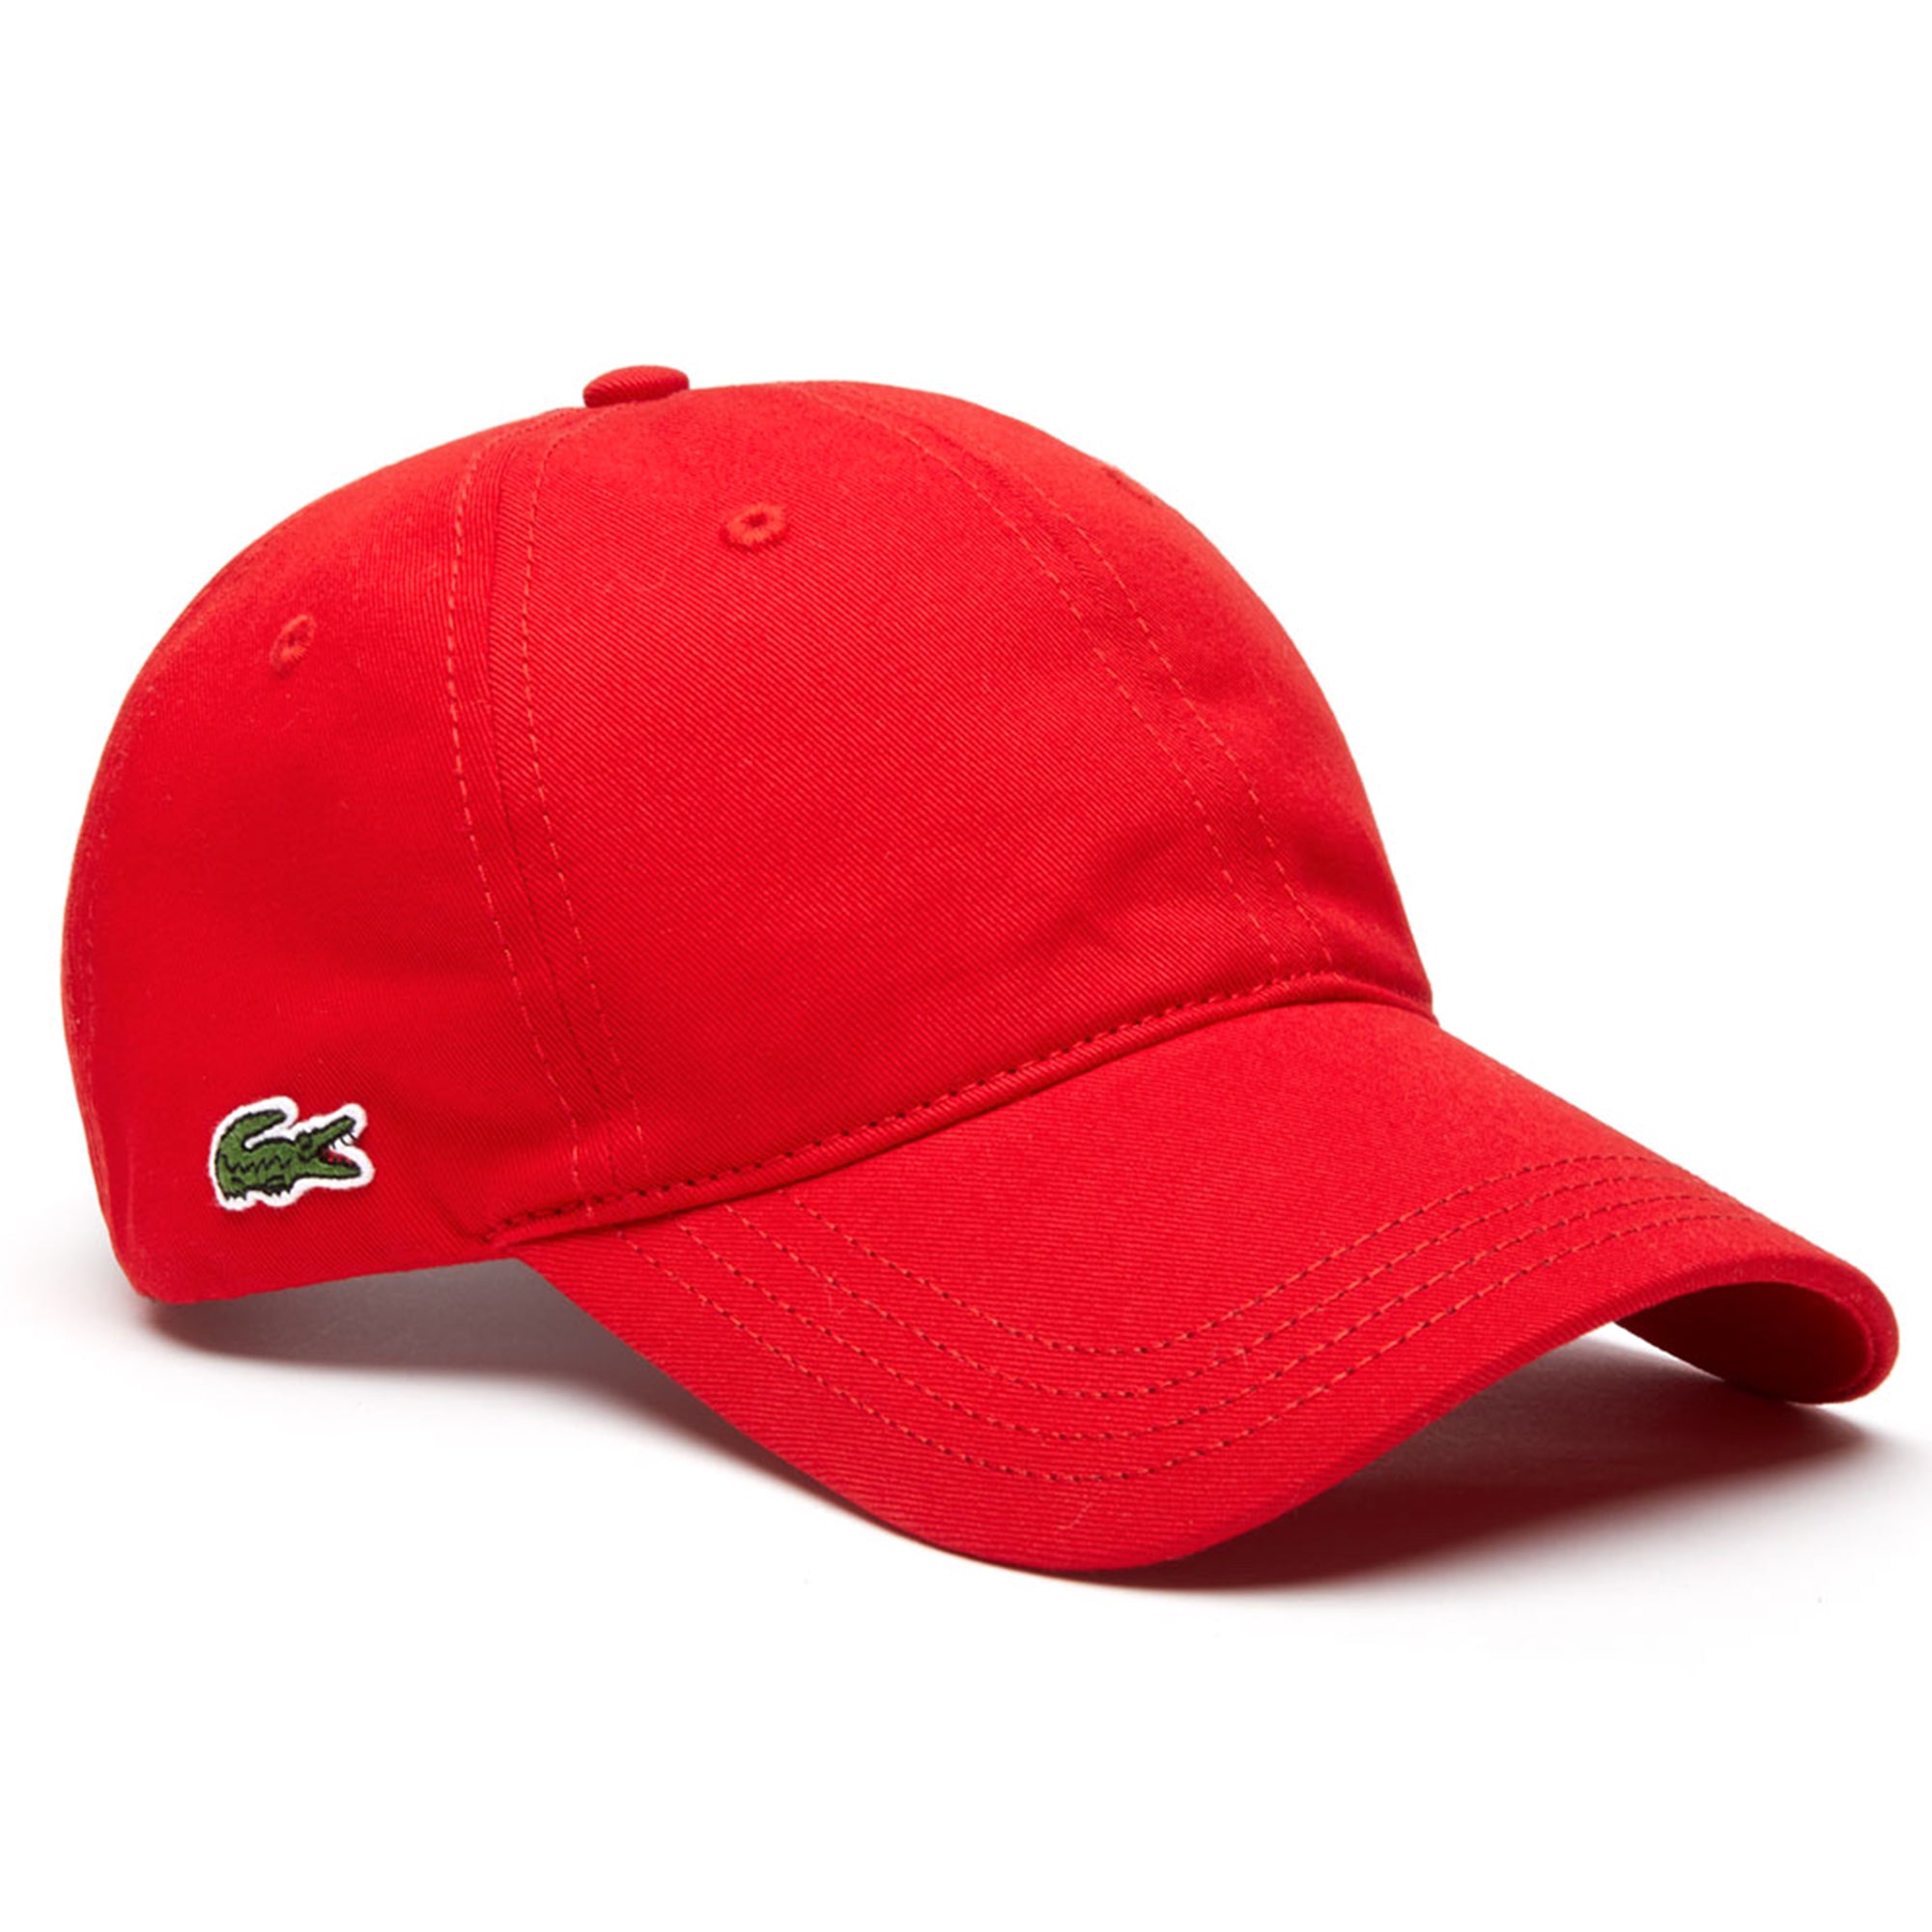 lacoste red hat